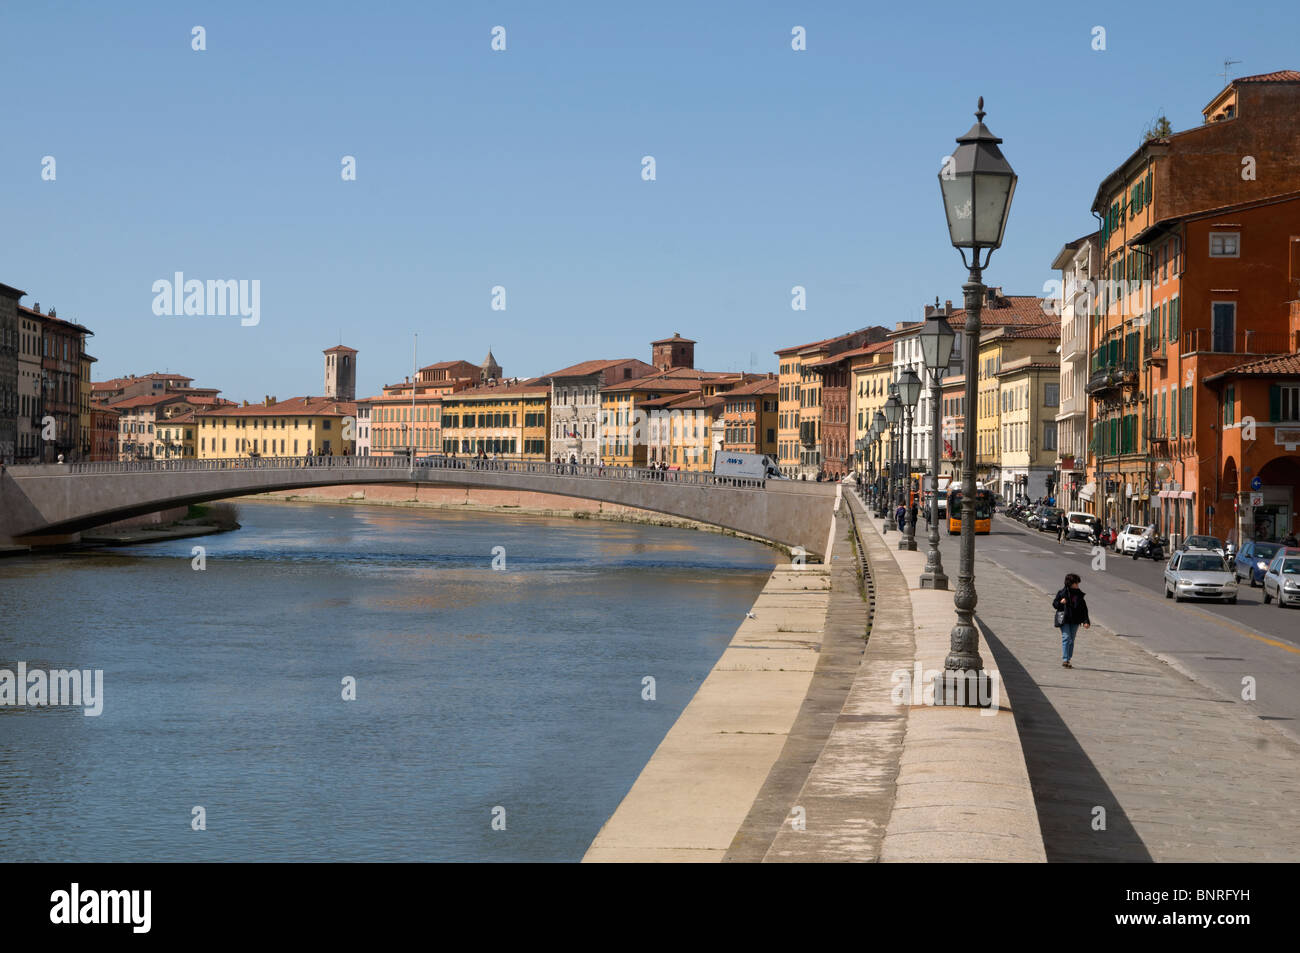 Downtown on the arno river Pisa,italy Stock Photo